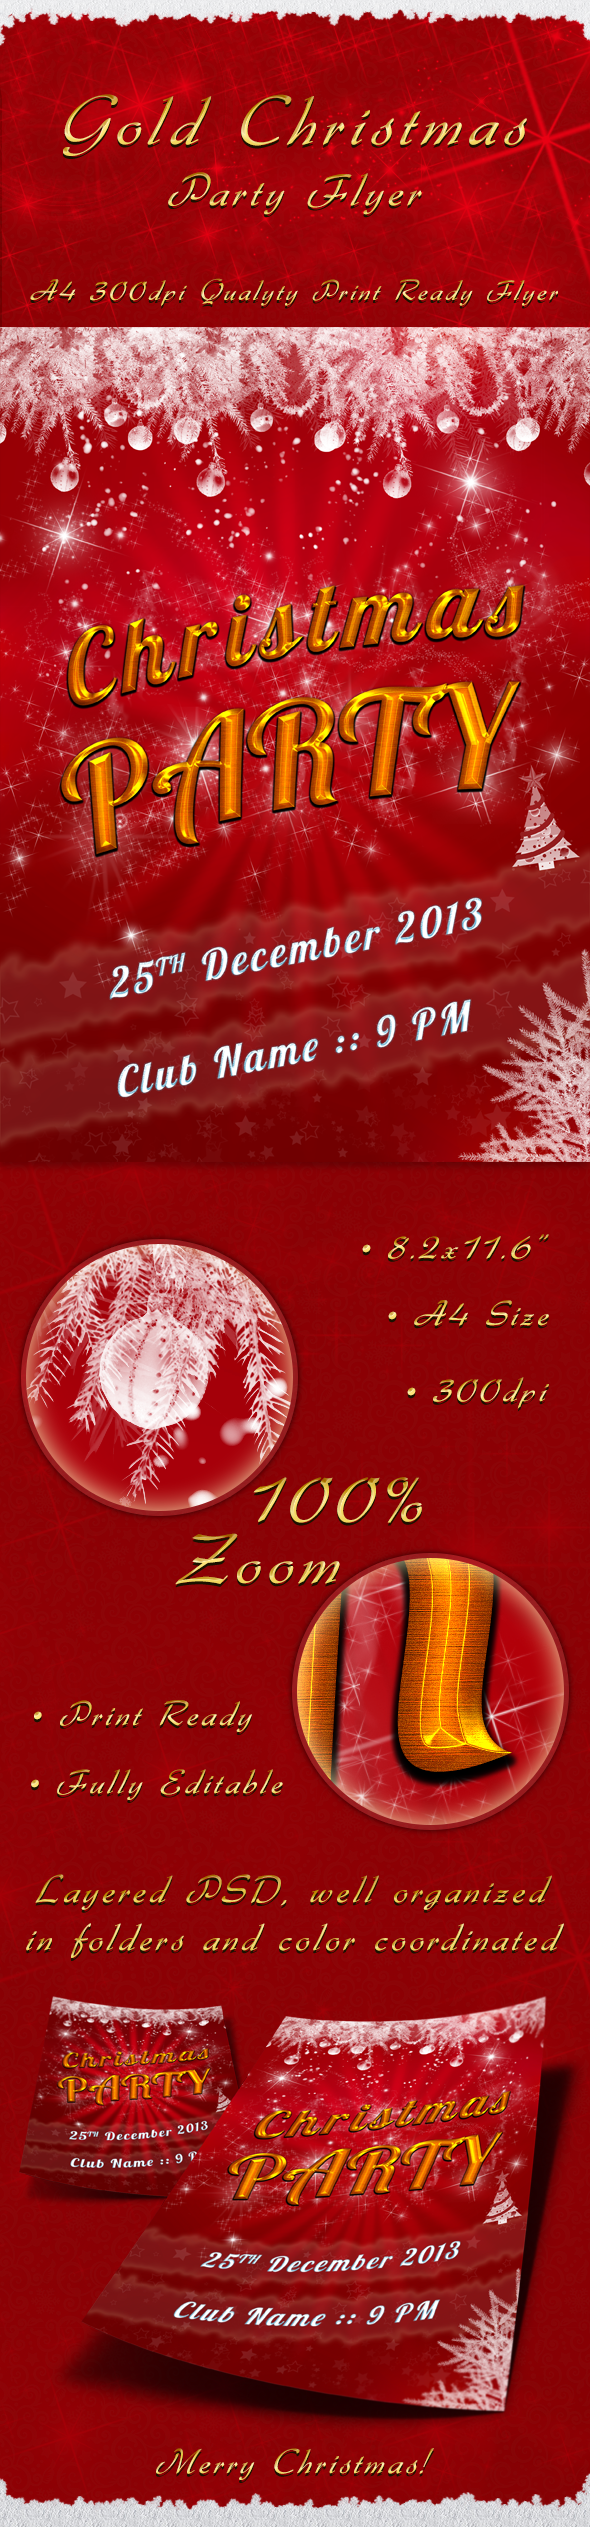 Gold Christmas Party Flyer